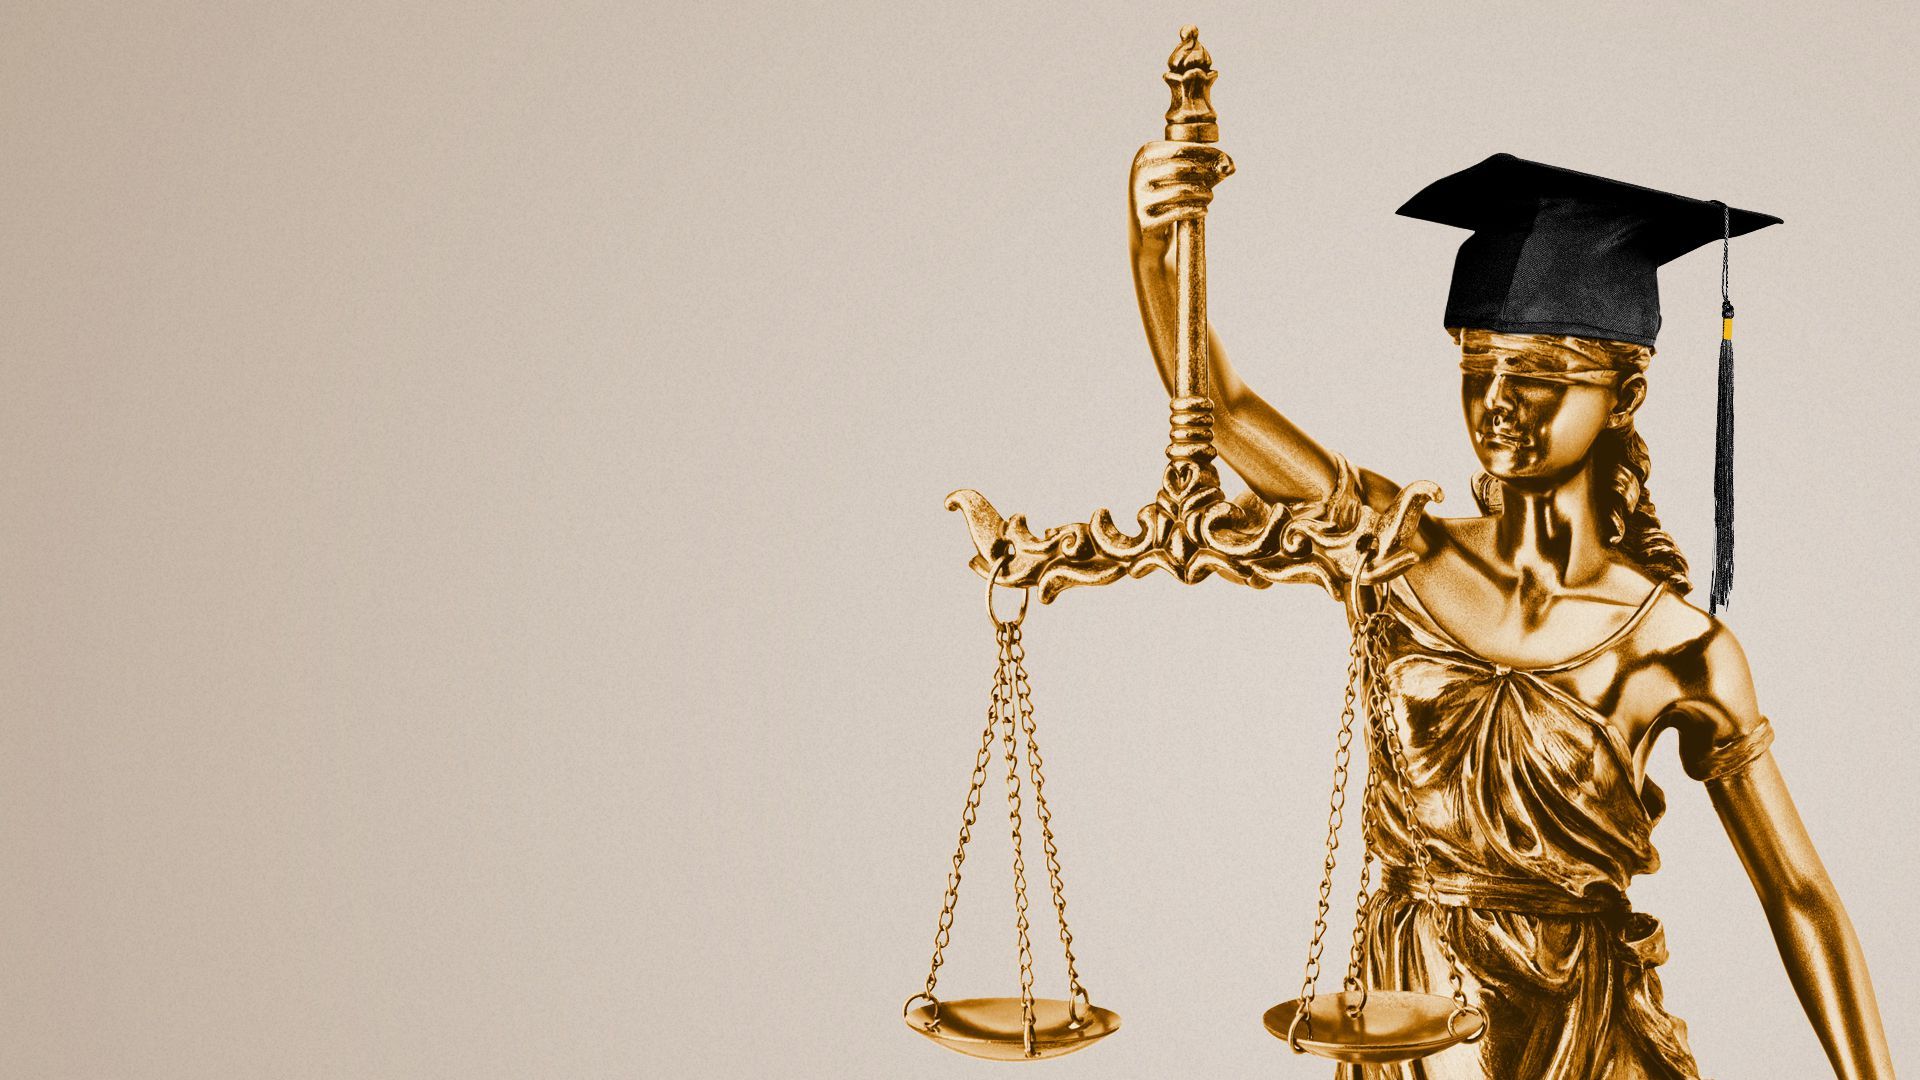 Illustration of a graduation cap on the statue of Lady Justice.